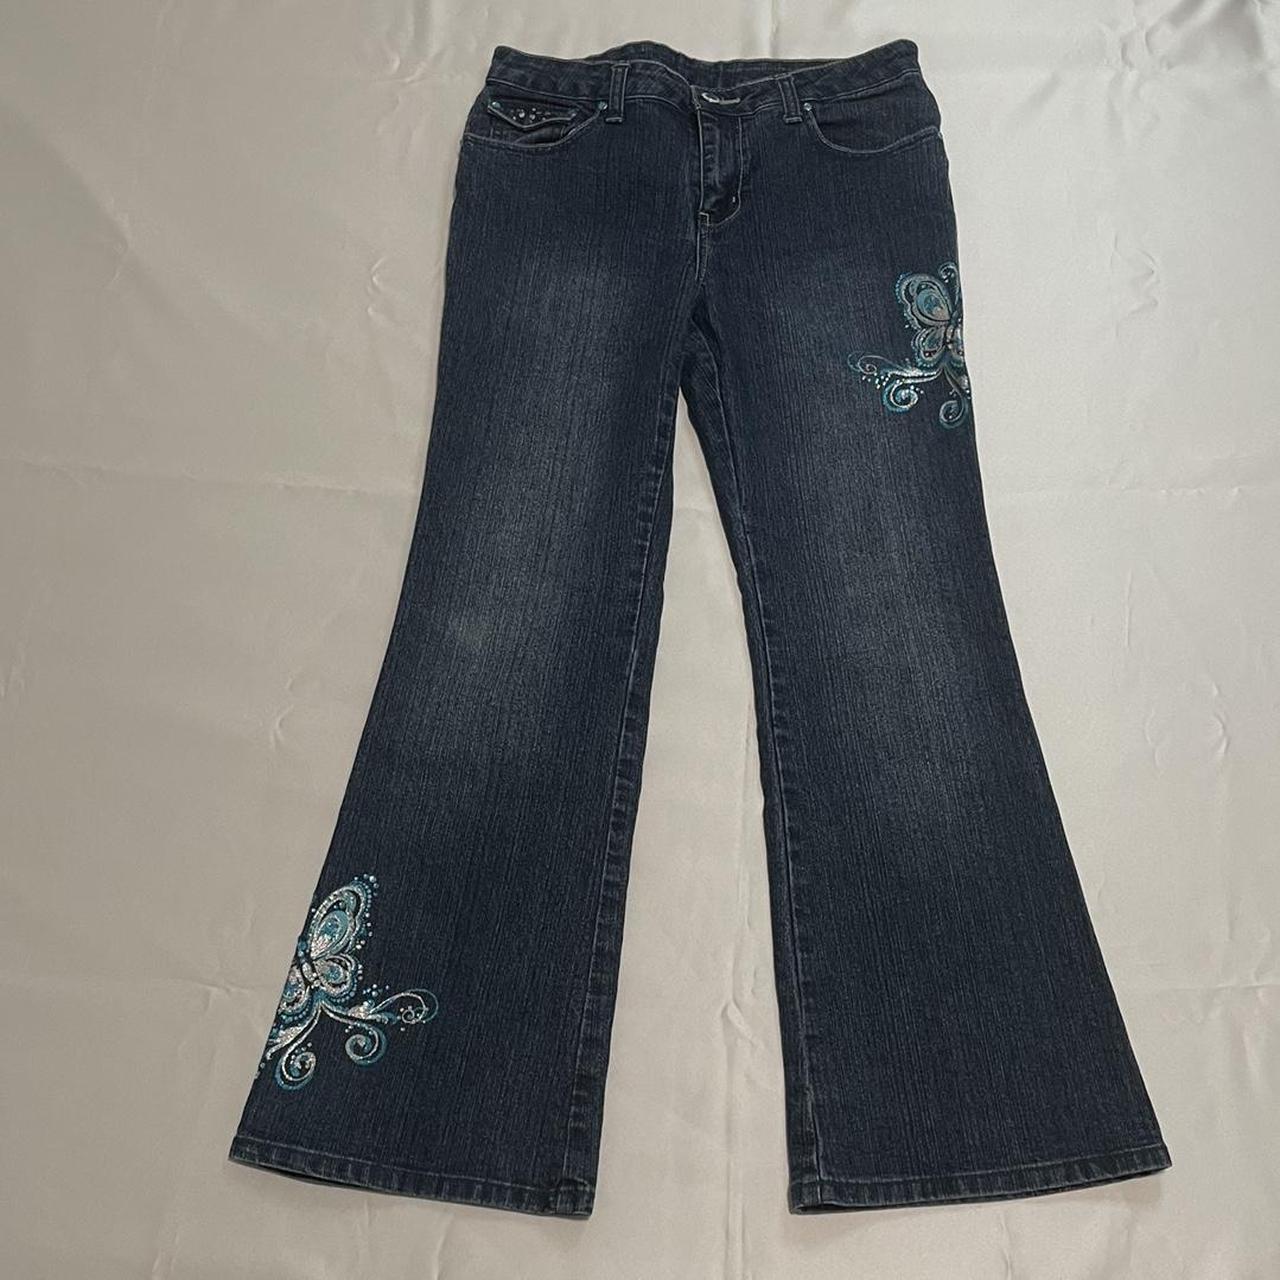 Canyon River Blues Women's Blue and Silver Jeans (2)